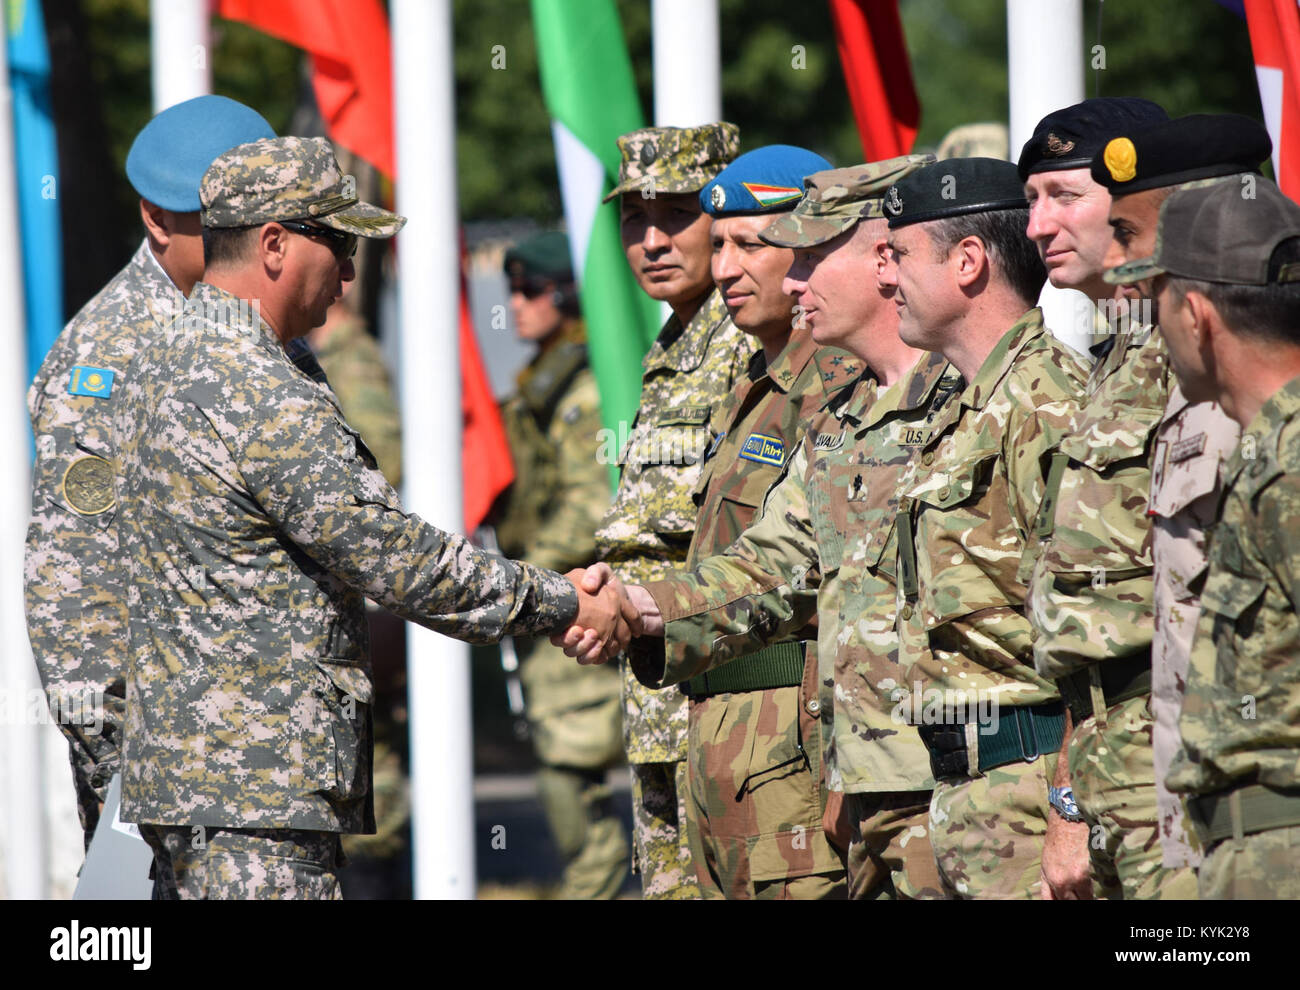 Maj. Gen. Murat Bektanov, Kazakhstan Land Forces commander, greets representatives from each nation participating in Exercise Steppe Eagle 17 during the opening ceremony July 22, 2017, at Illisky Training Center, Kazakhstan. Stock Photo